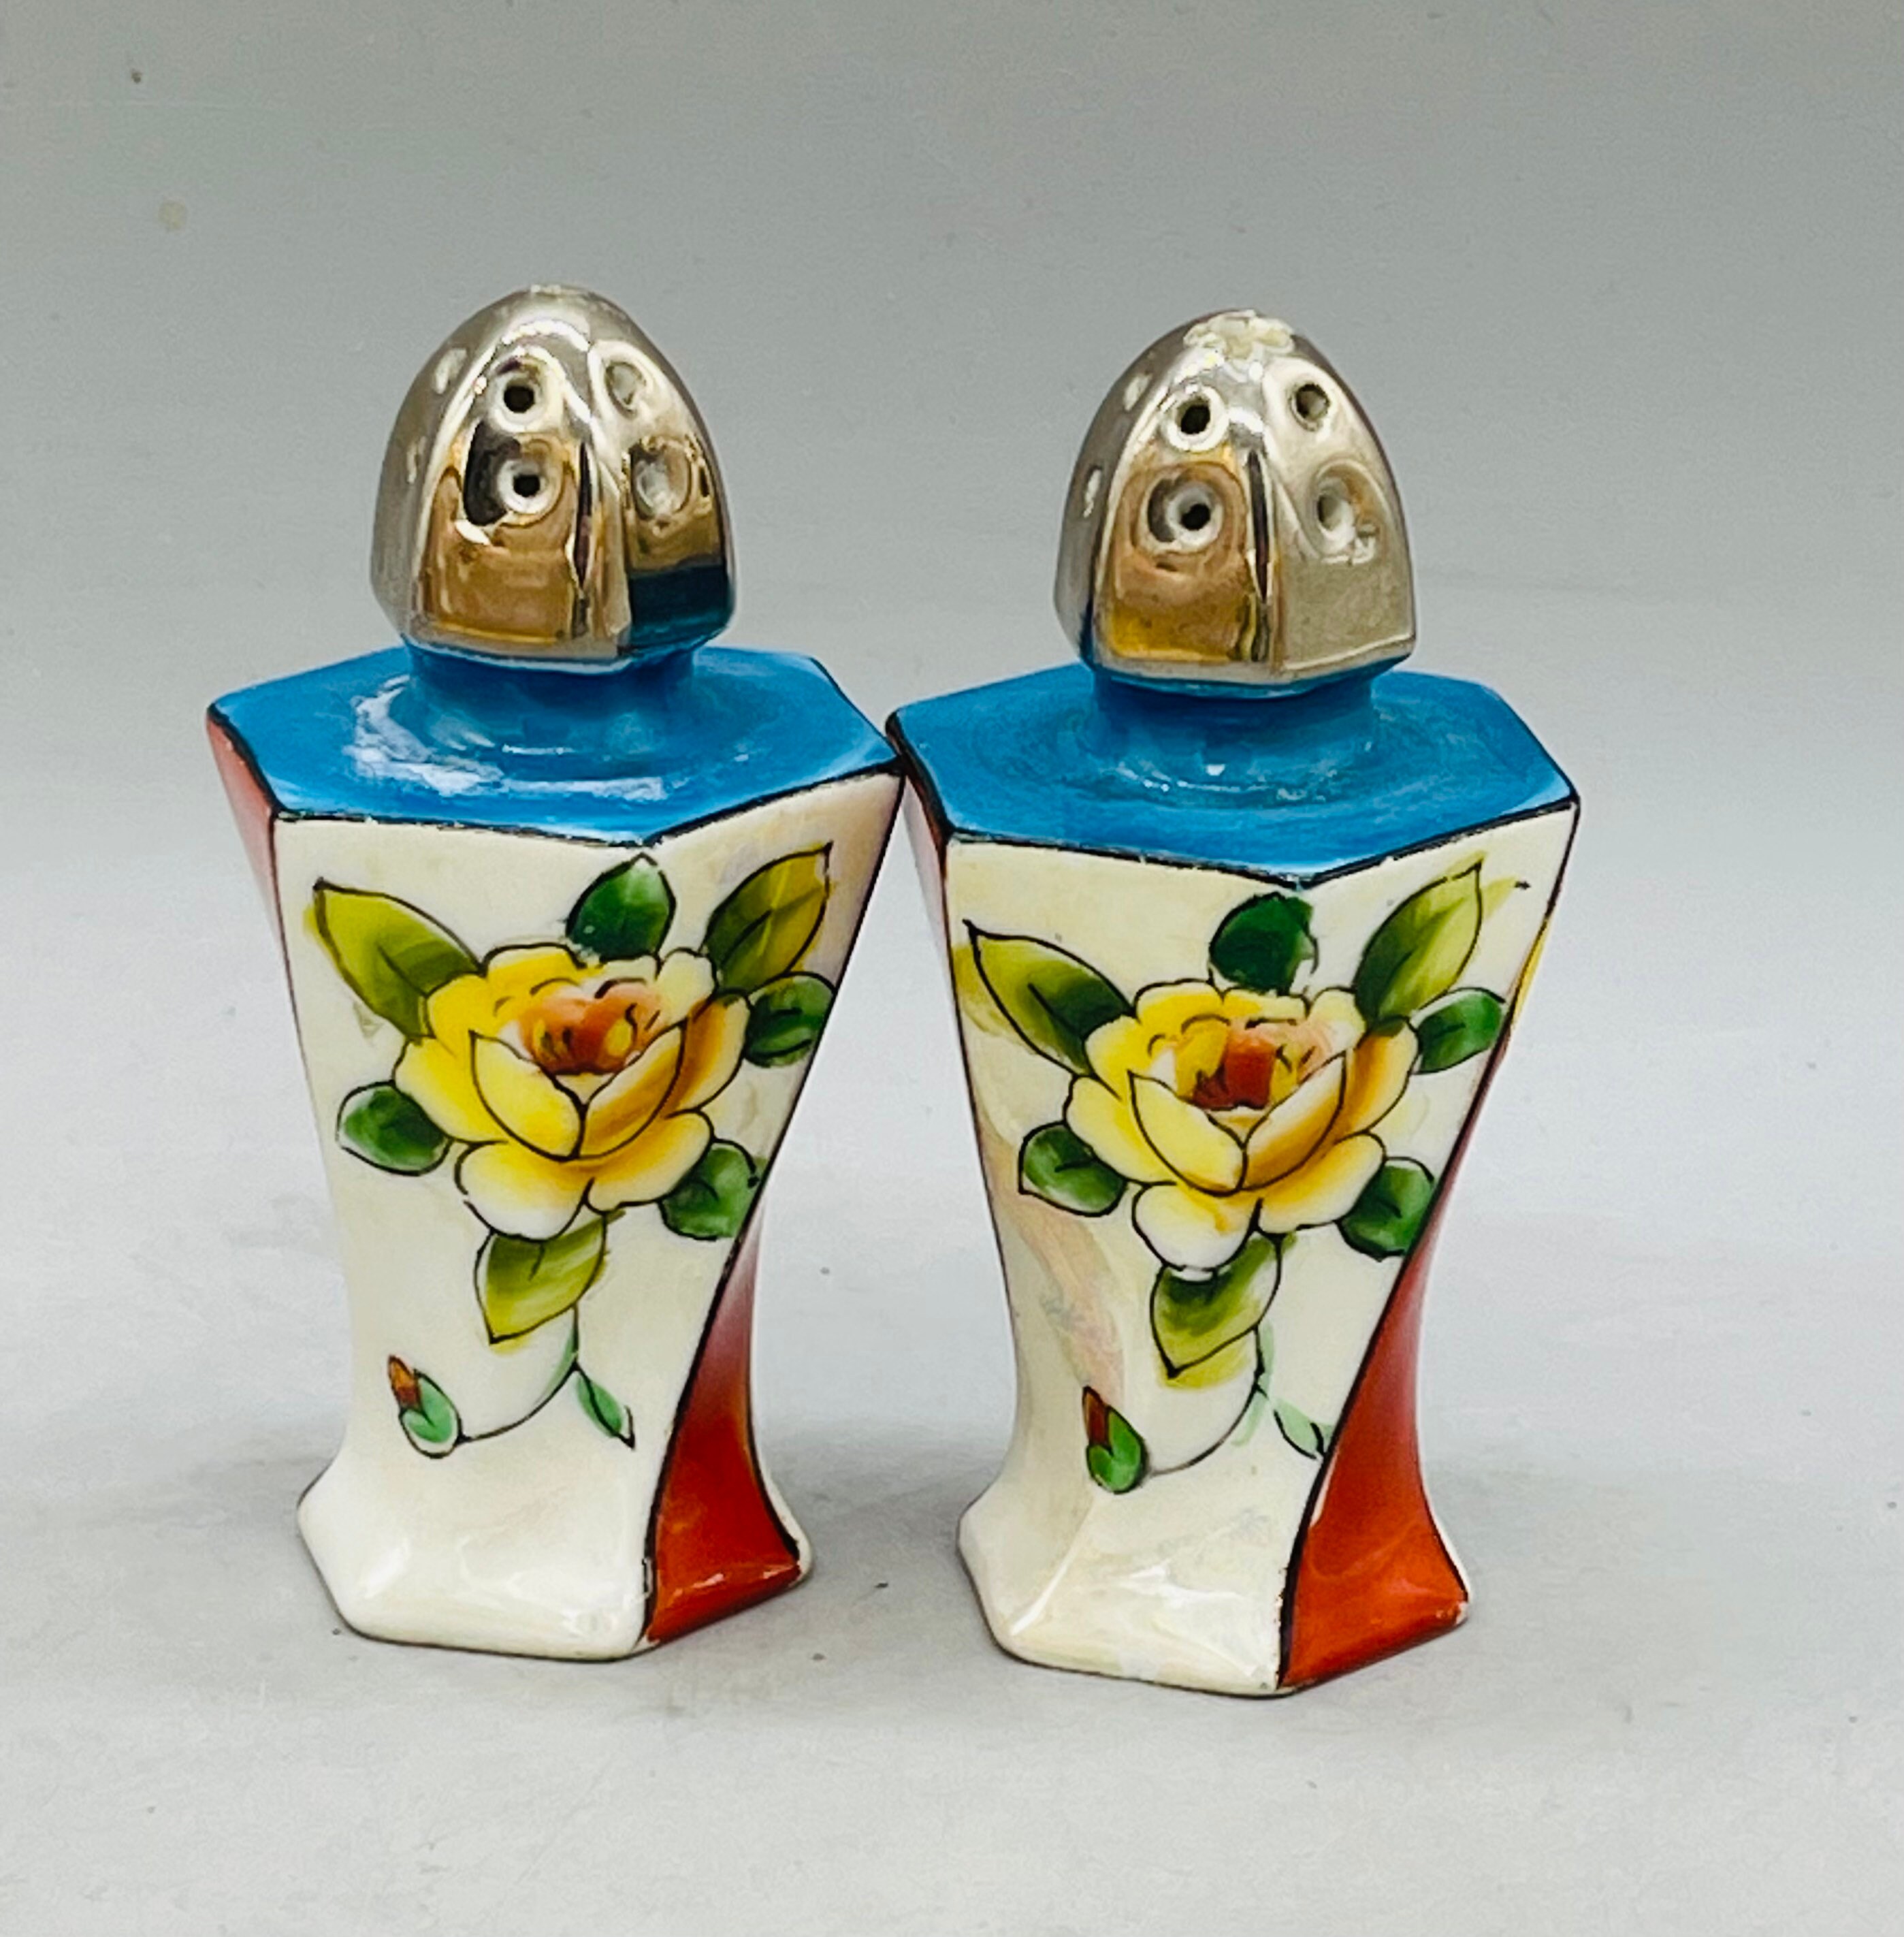 Collectables Kitchenware Bisque Porcelain Vintage Japan Salt and Pepper Shakers Flowers Antique Shakers Very Old Shakers